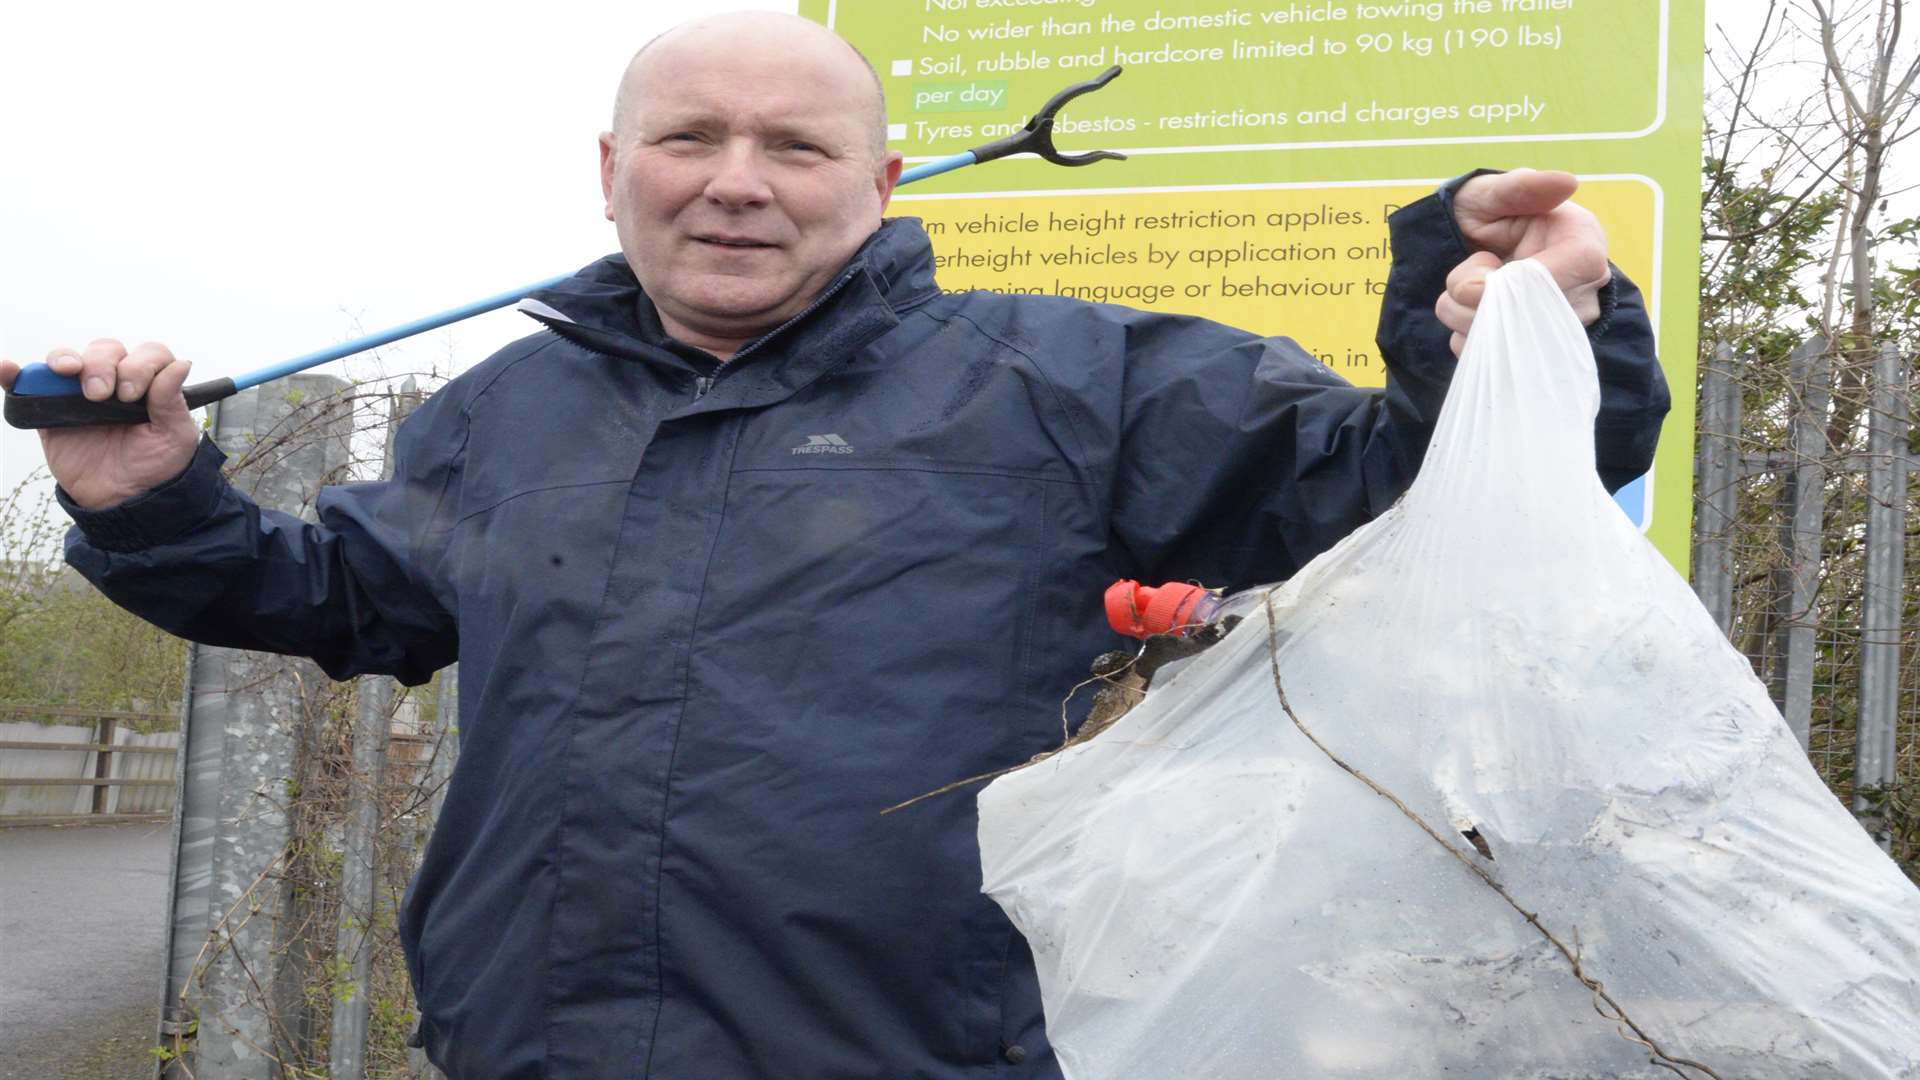 Kent rubbish tips processed tonnes of rubbish last year. Picture: Chris Davey